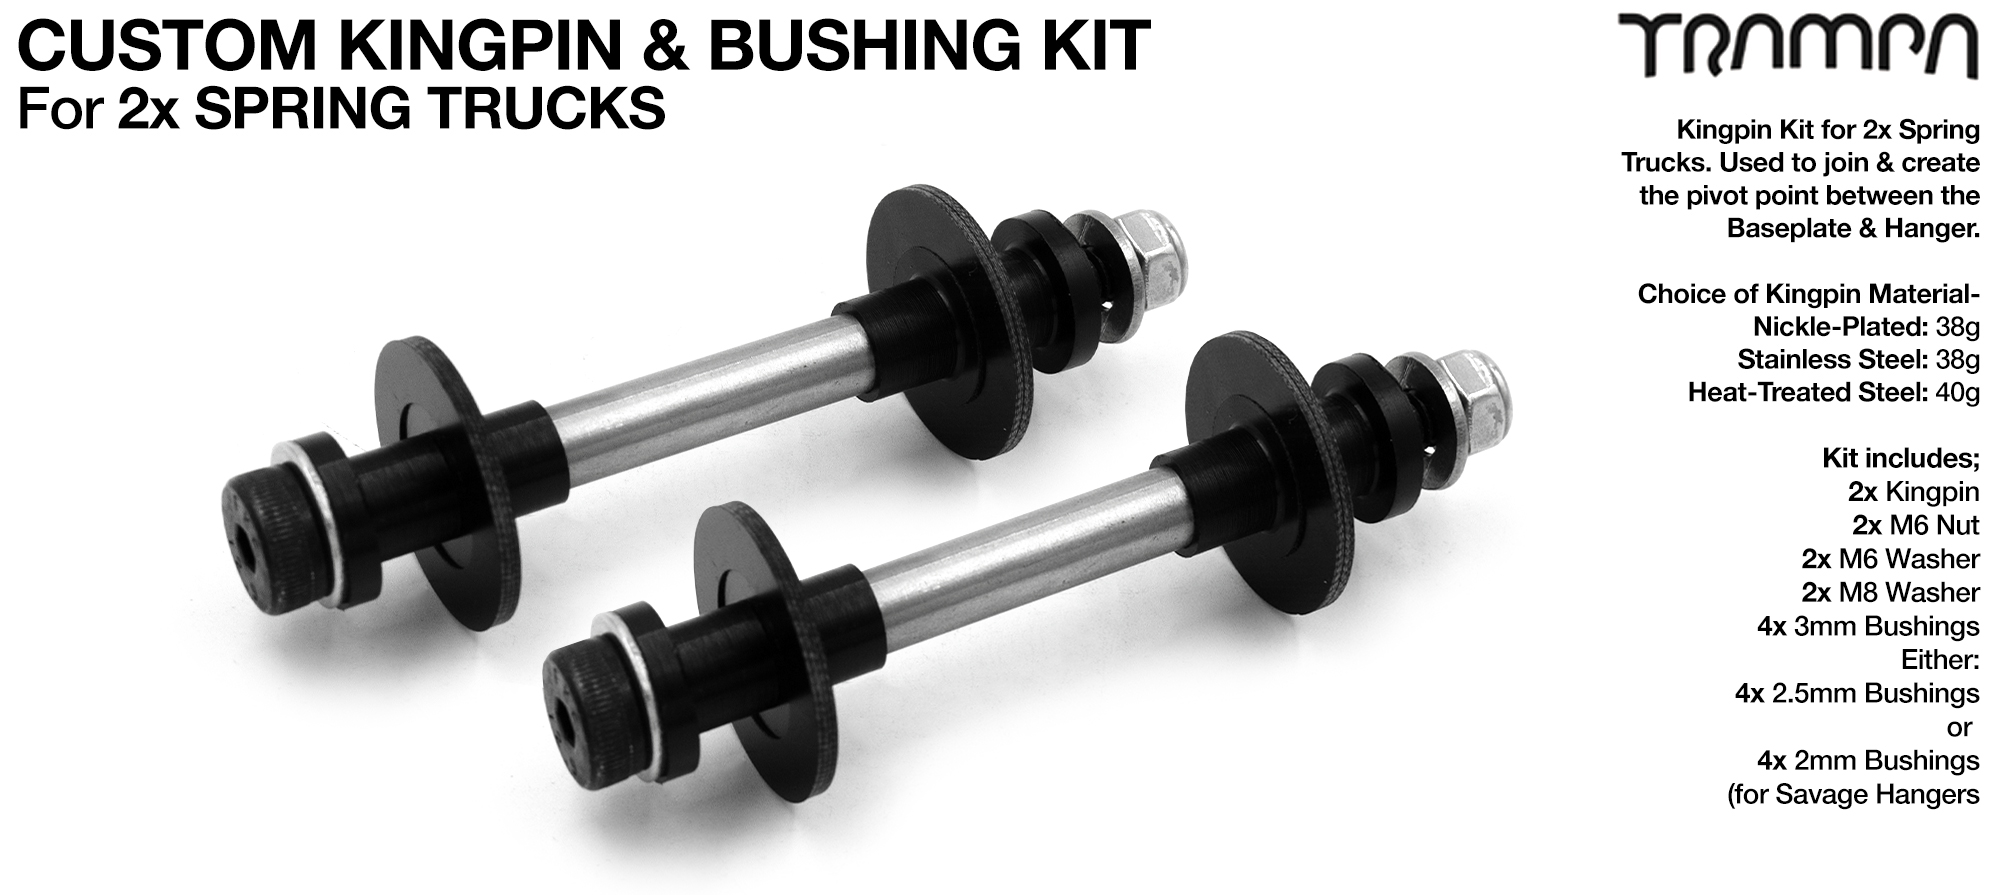 2x Kingpin kit for TRAMPA Spring style Trucks - Nikel plated, Stainless Steel or HEAT Treat Steel